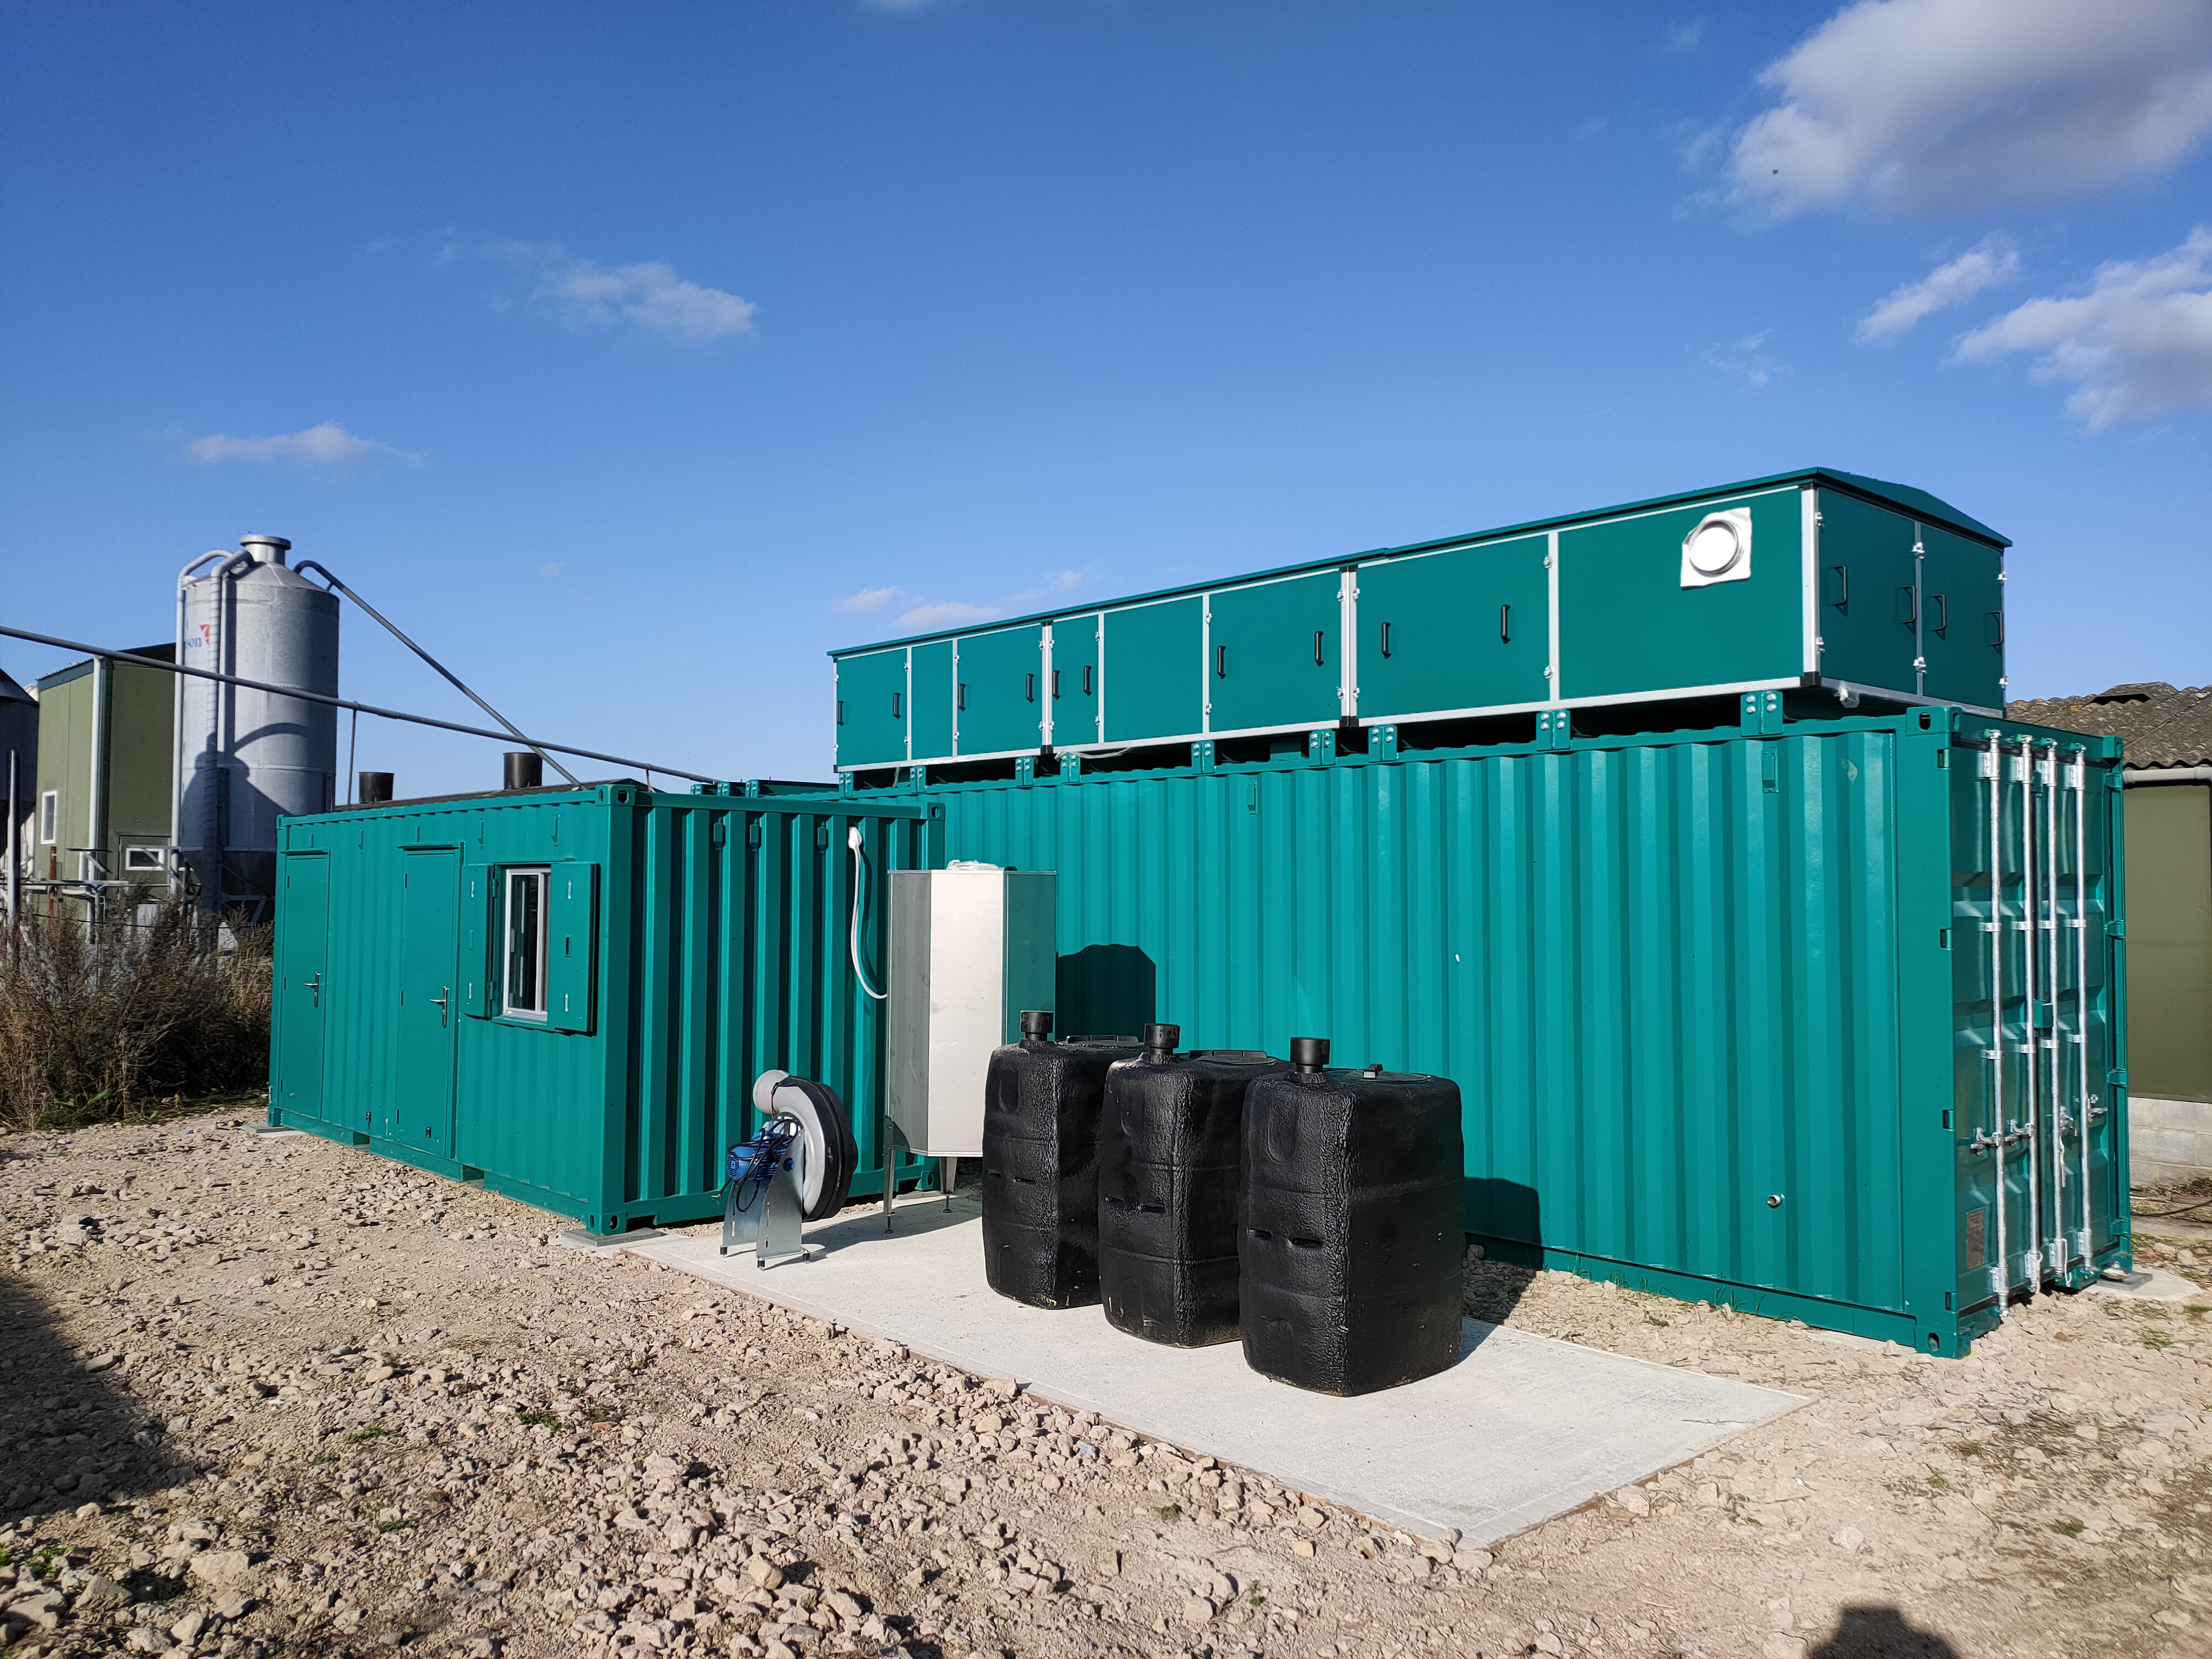 The insect bioreactor. It is a large green container made of congregated metal.